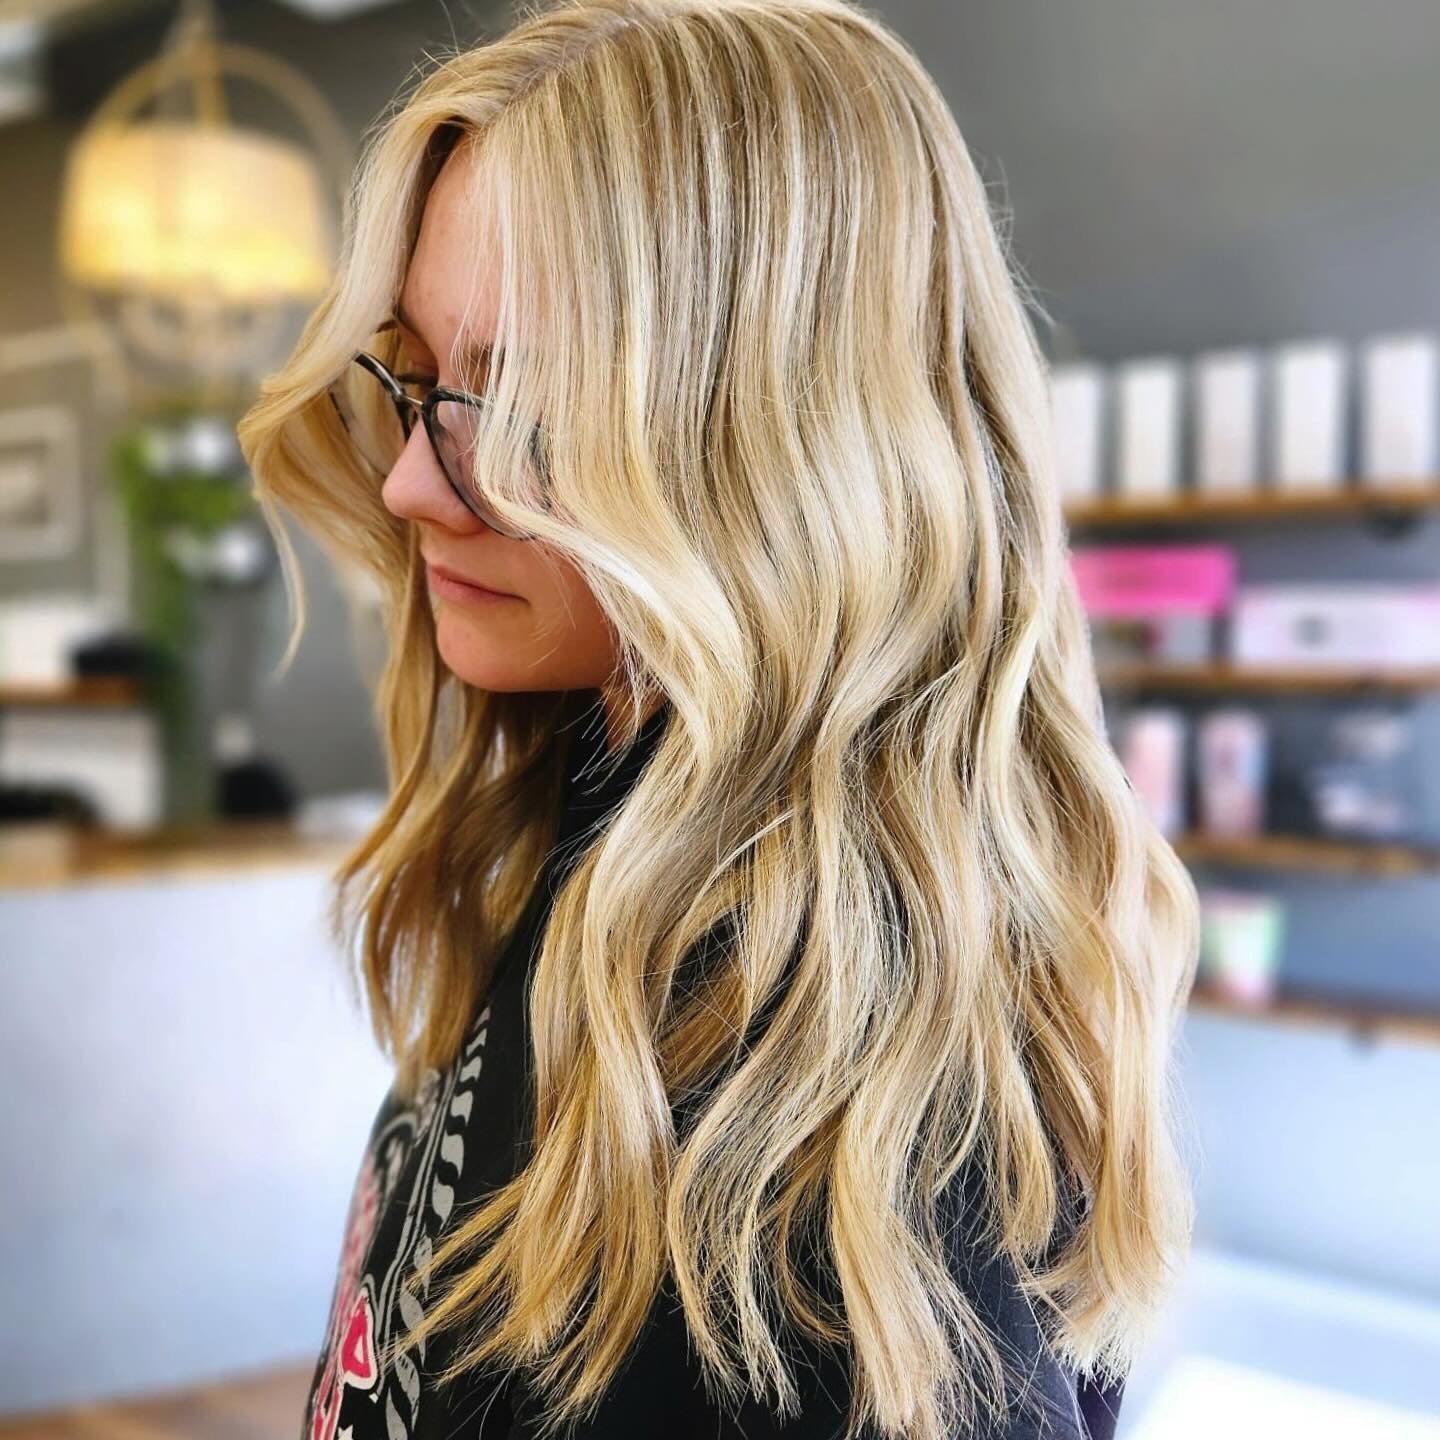 A boost of blonde to brighten up your day ☀️

📷 @naomis_everlonghair_journey in #Lacombe

____
Lacombe salon &bull; blonde hair &bull; blonde hair inspo &bull; highlights &bull; foils highlights &bull; blond hair